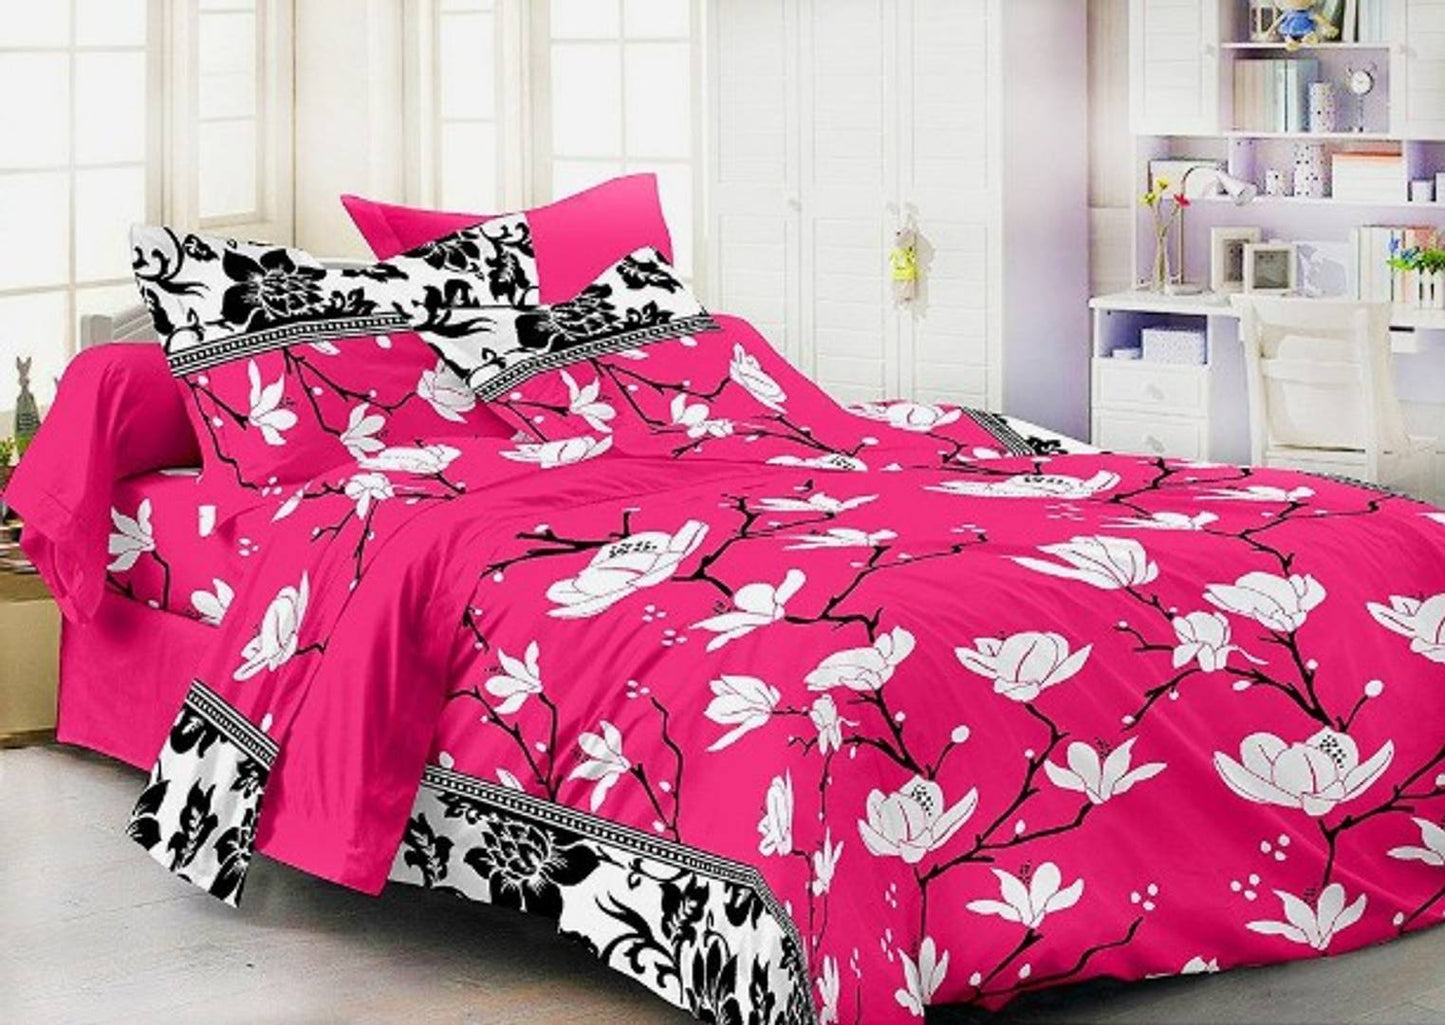 Stylish Polycotton Floral Printed Double Bedsheet With Pillow Covers